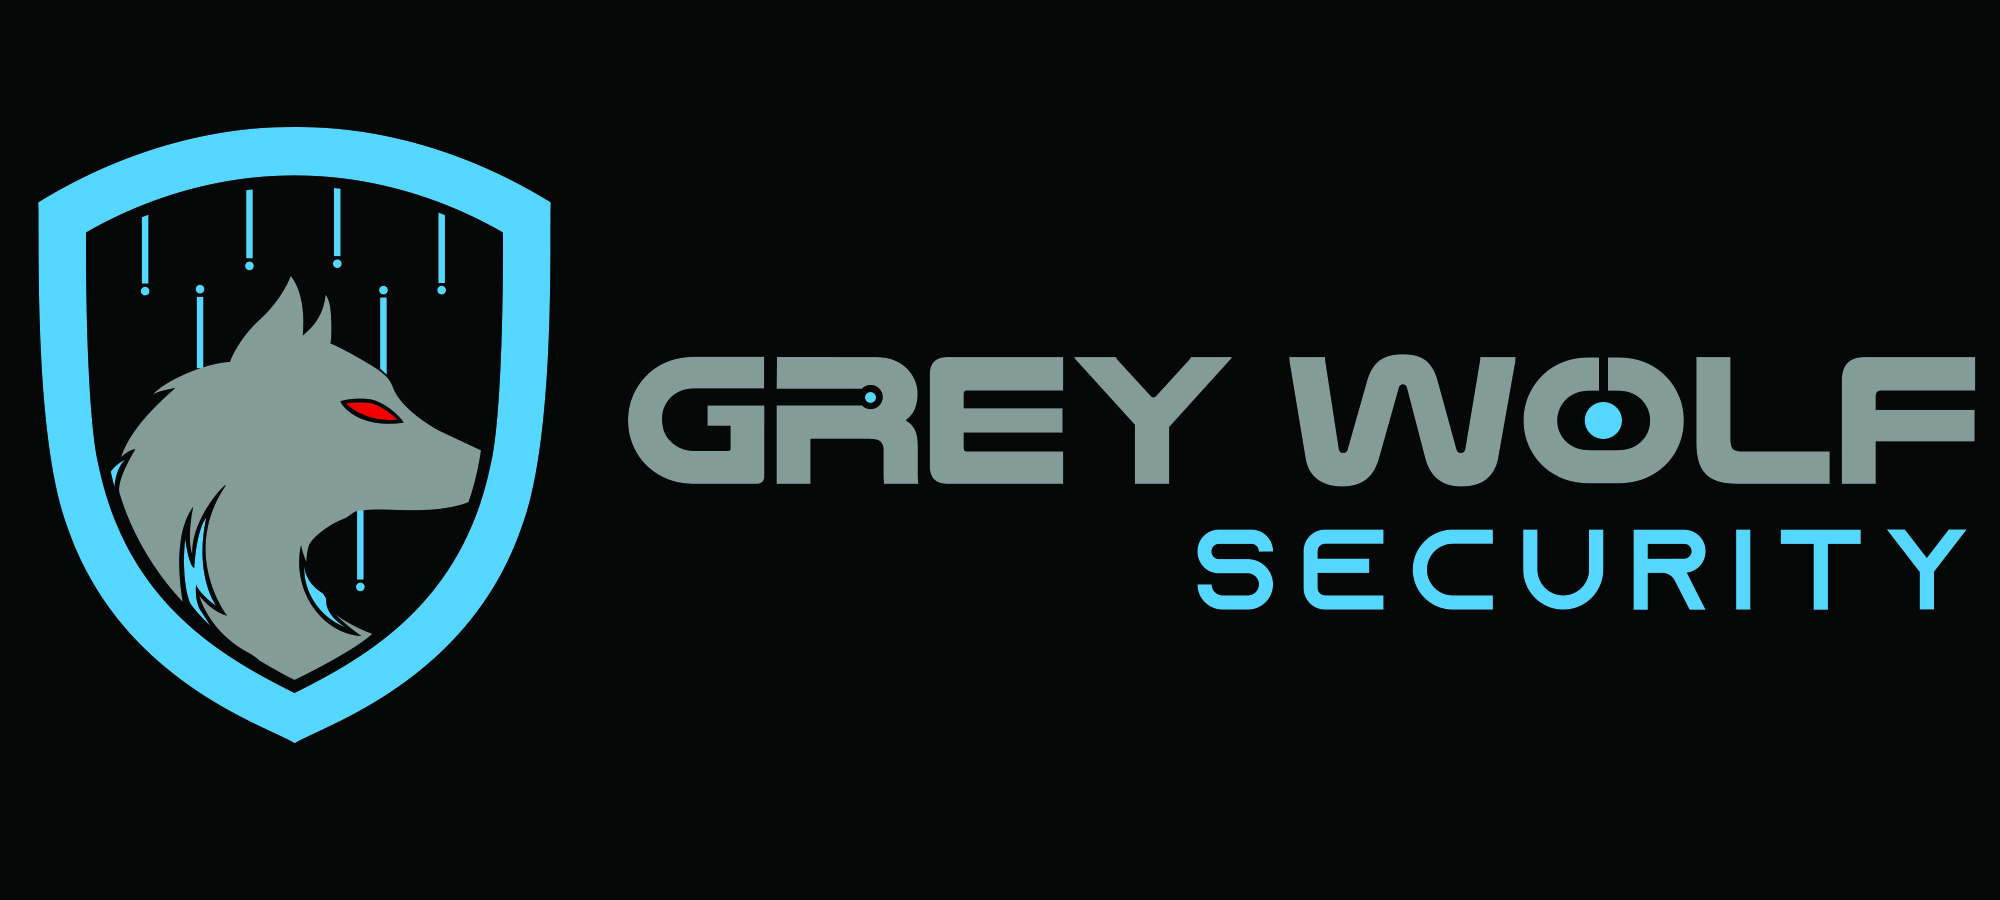 Featured Image for Grey Wolf Security, LLC